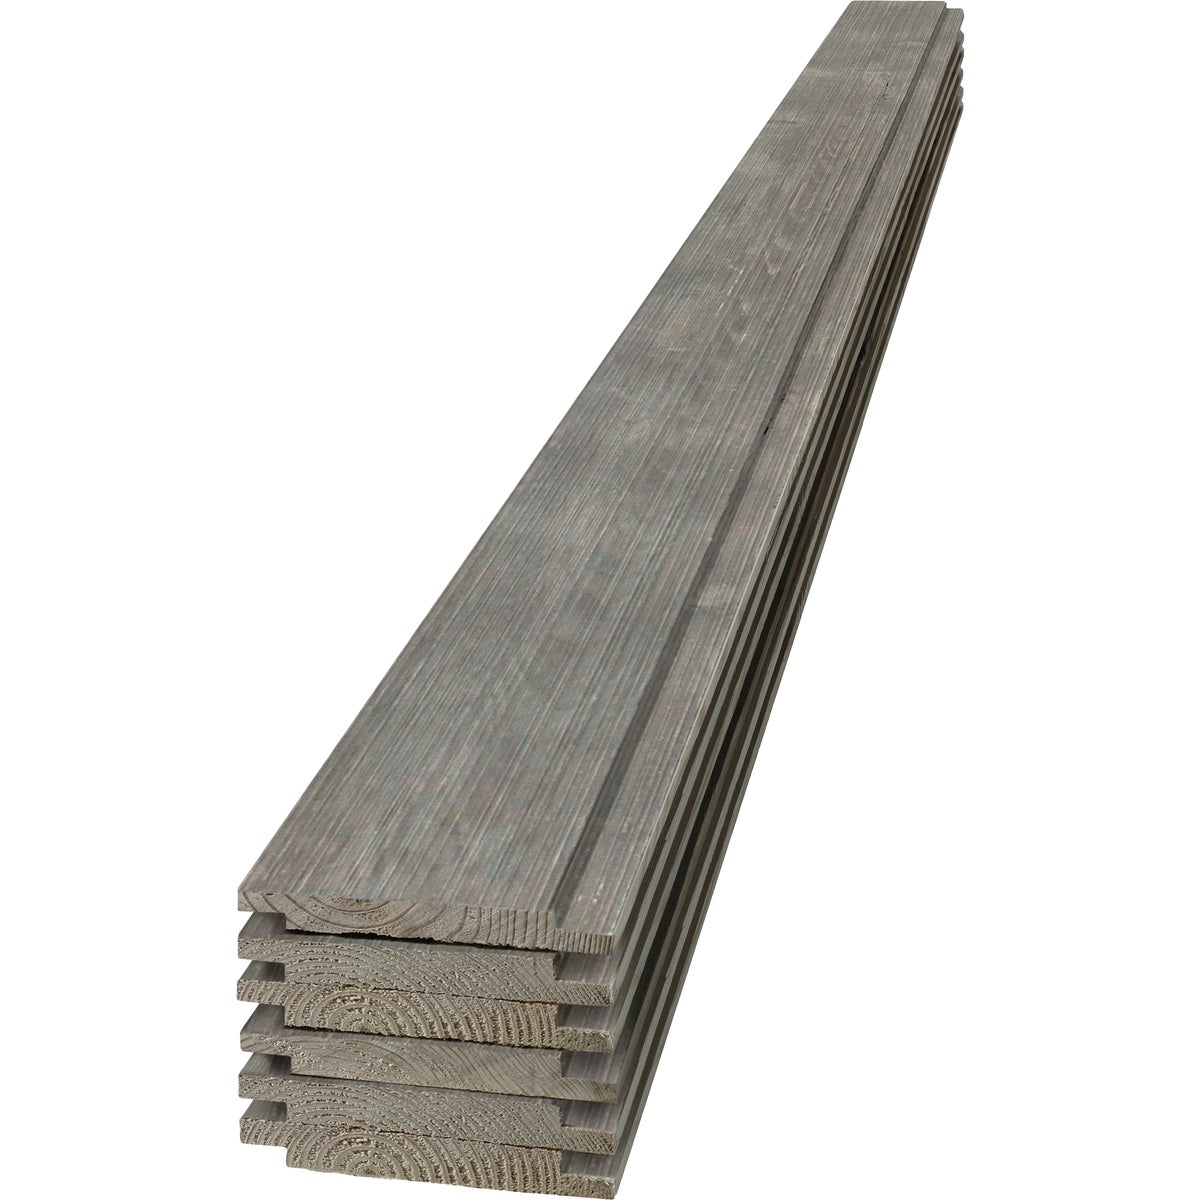 UFP-Edge 6 In. W x 6 Ft. L x 1 In. Thick Gray Wood Rustic Shiplap Board (13.86 Sq. Ft./6-Pack)